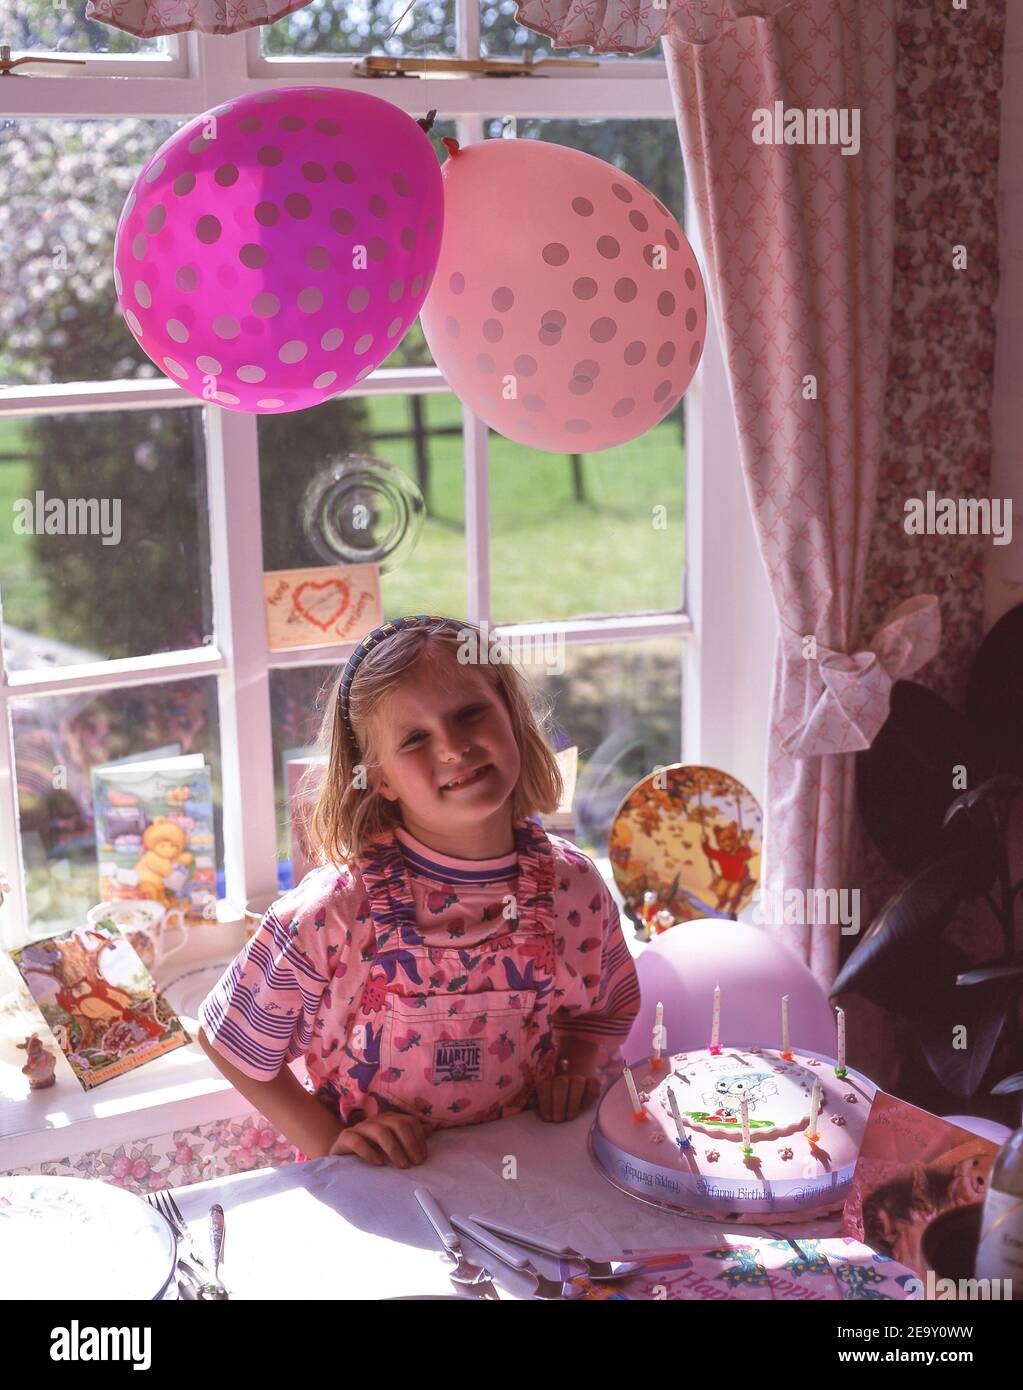 Young girl with her 8th birthday cake, Winkfield, Berkshire, England, United Kingdom Stock Photo